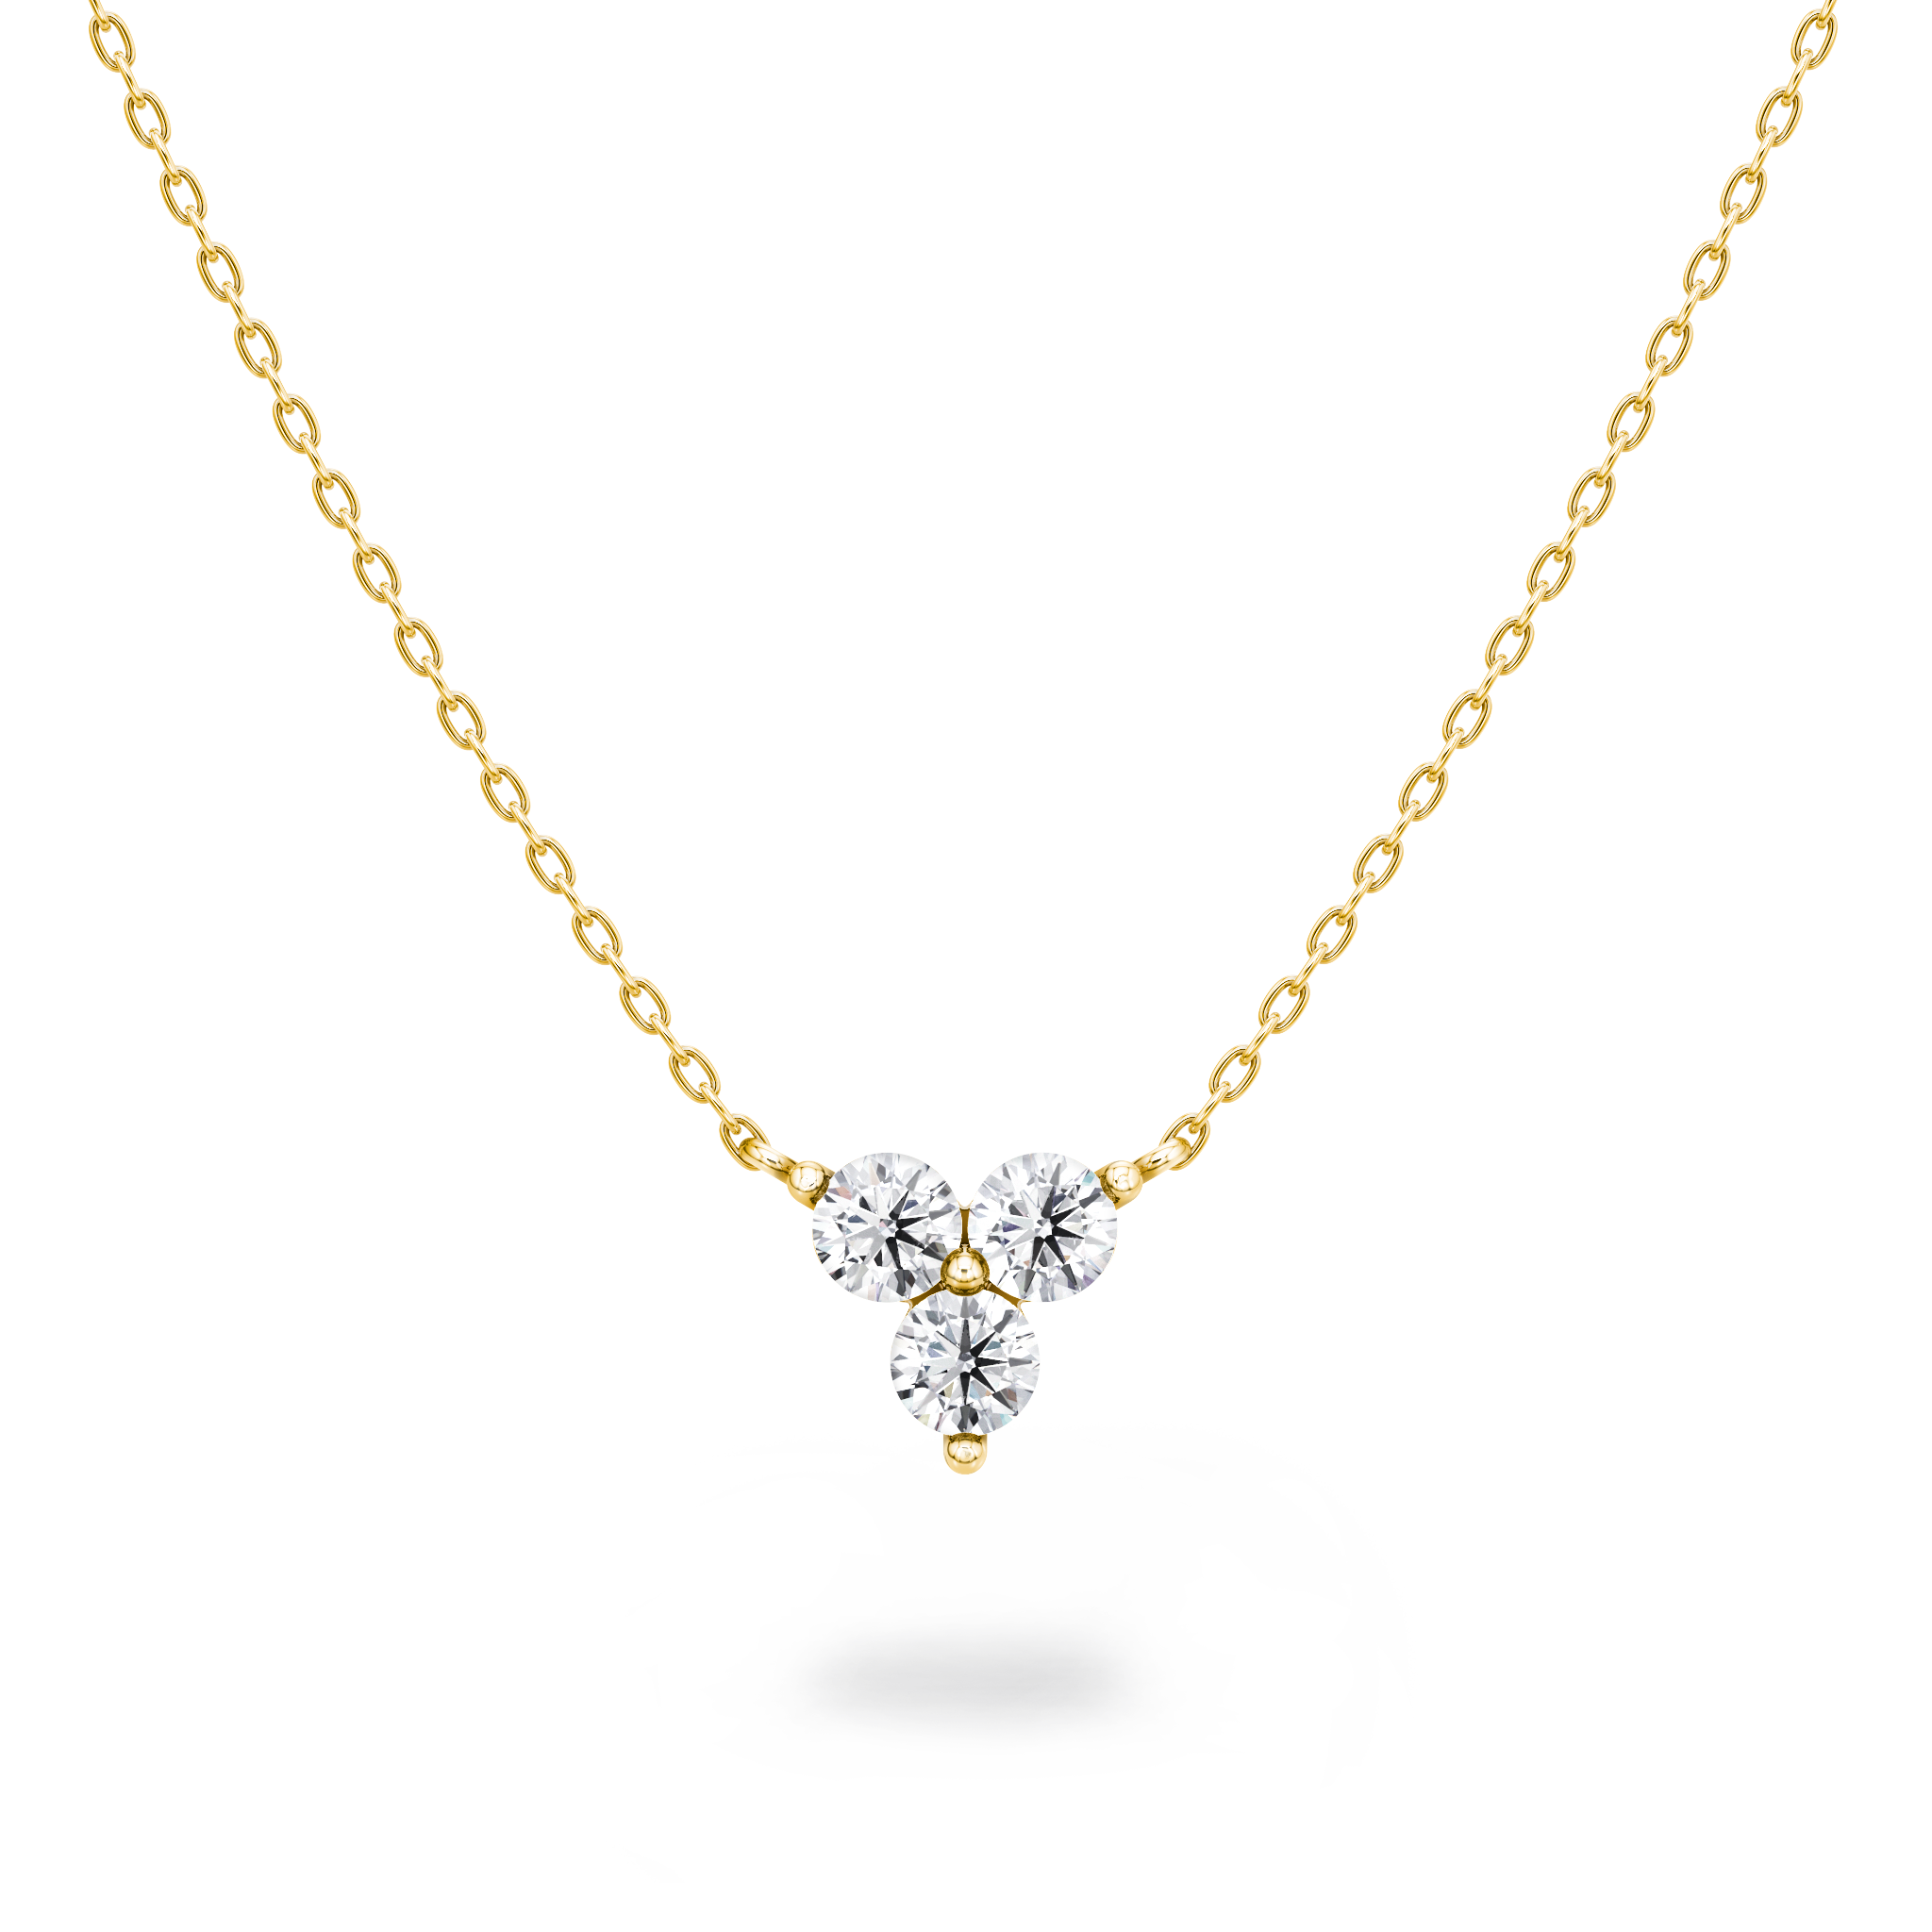 Shimansky - Clover Diamond Necklace crafted in 14K Yellow Gold